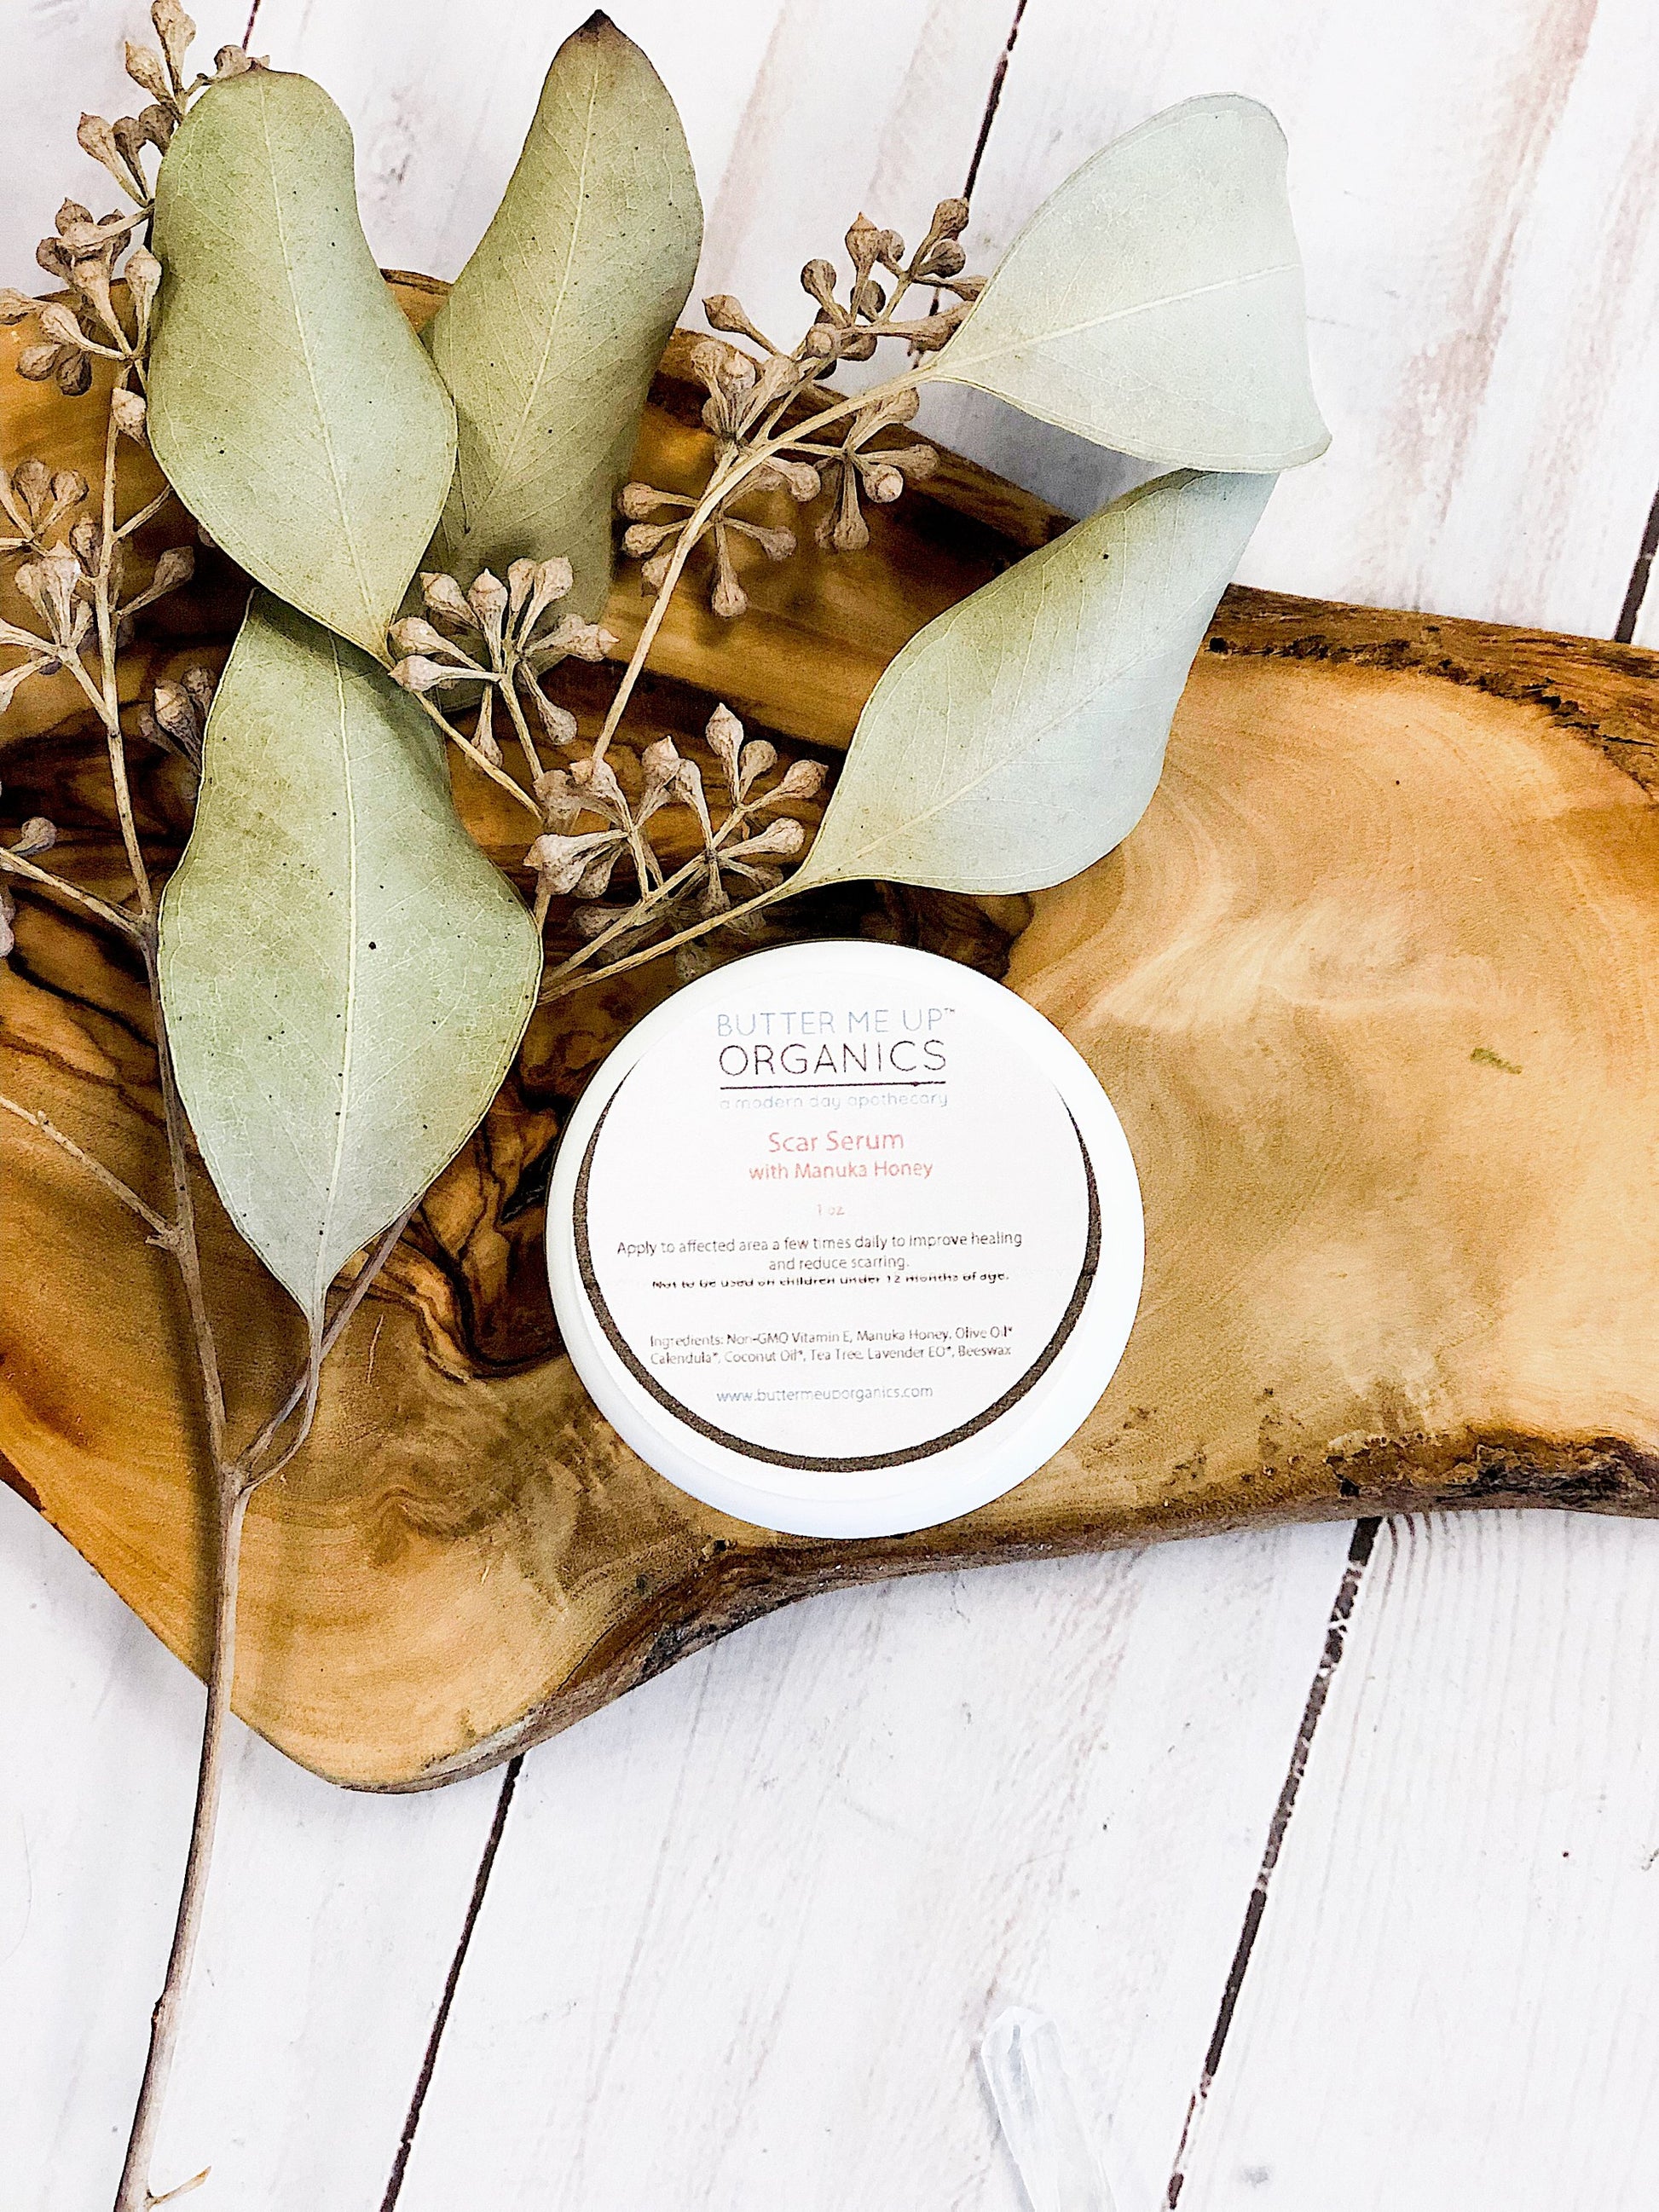 A small container of "White Smokey" Scar Serum sits on a wooden board, surrounded by dry eucalyptus leaves. The label mentions ingredients and usage instructions, highlighting its place in organic skincare routines.